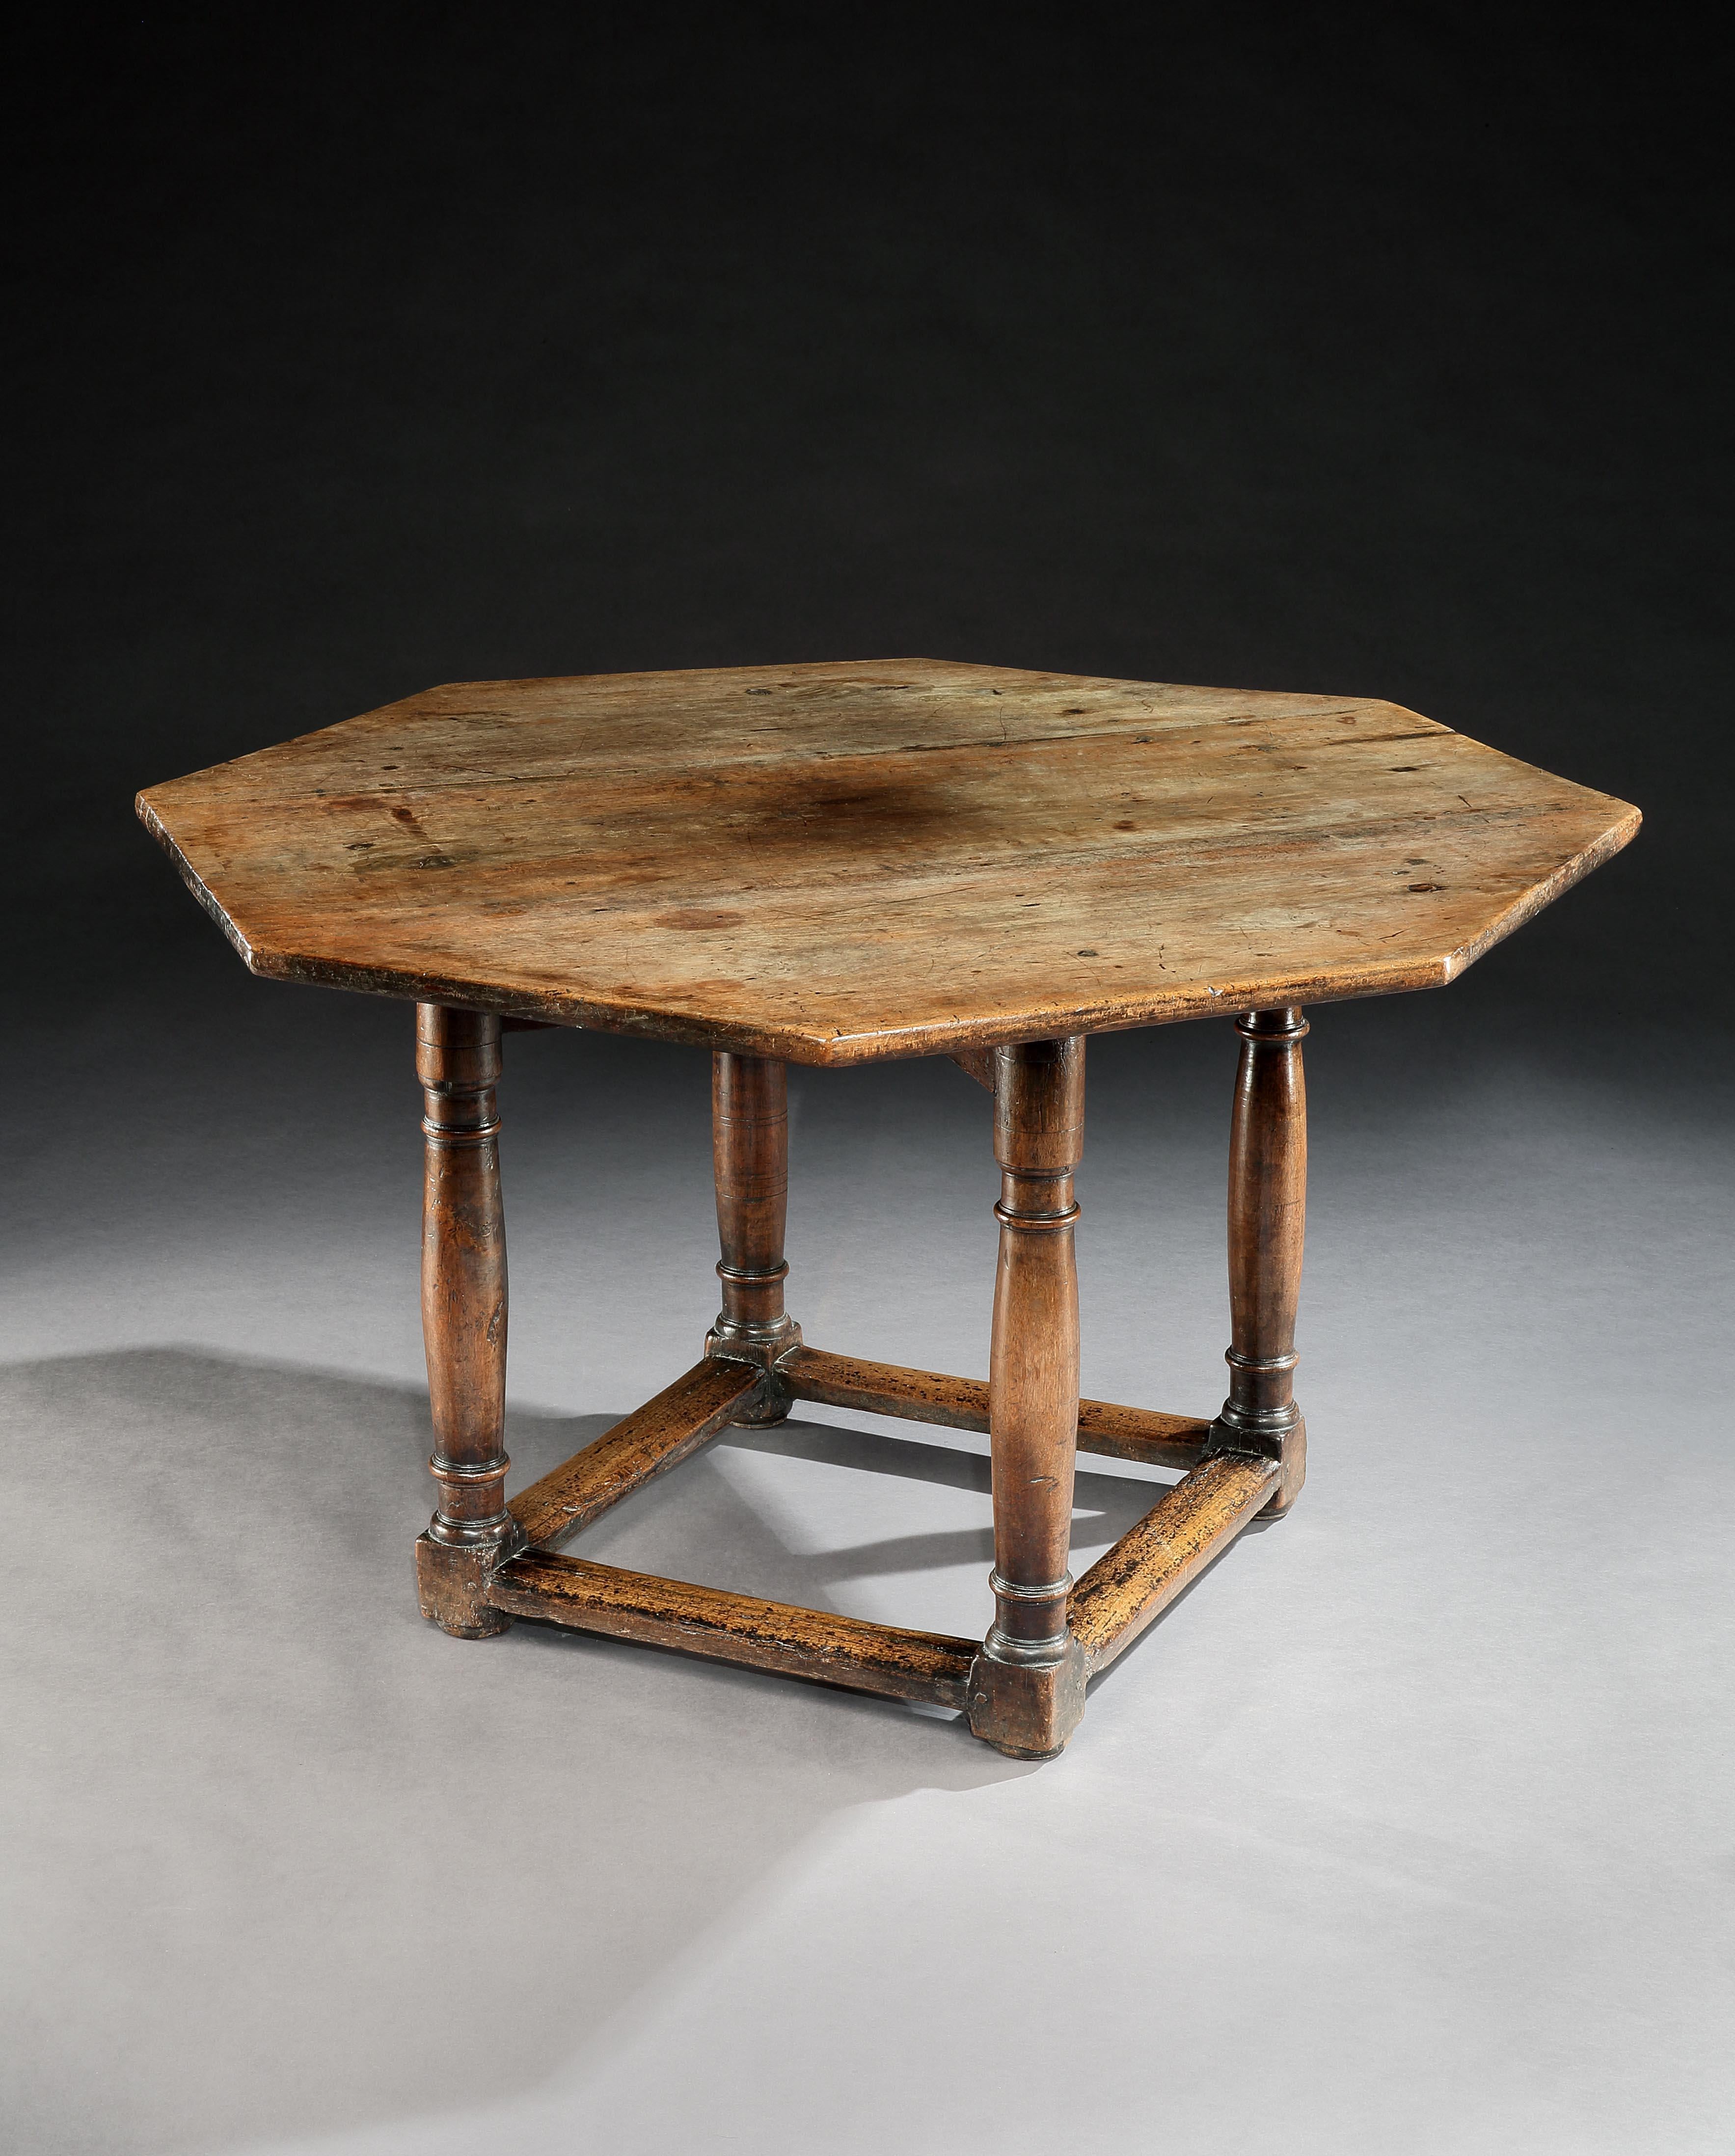 This table is of a rare and attractive form with characteristic Renaissance legs. It can serve as centre, dining or writing table. It has a lovely mellow color and lustrous patina. The top and base are original early 17th century associated elements